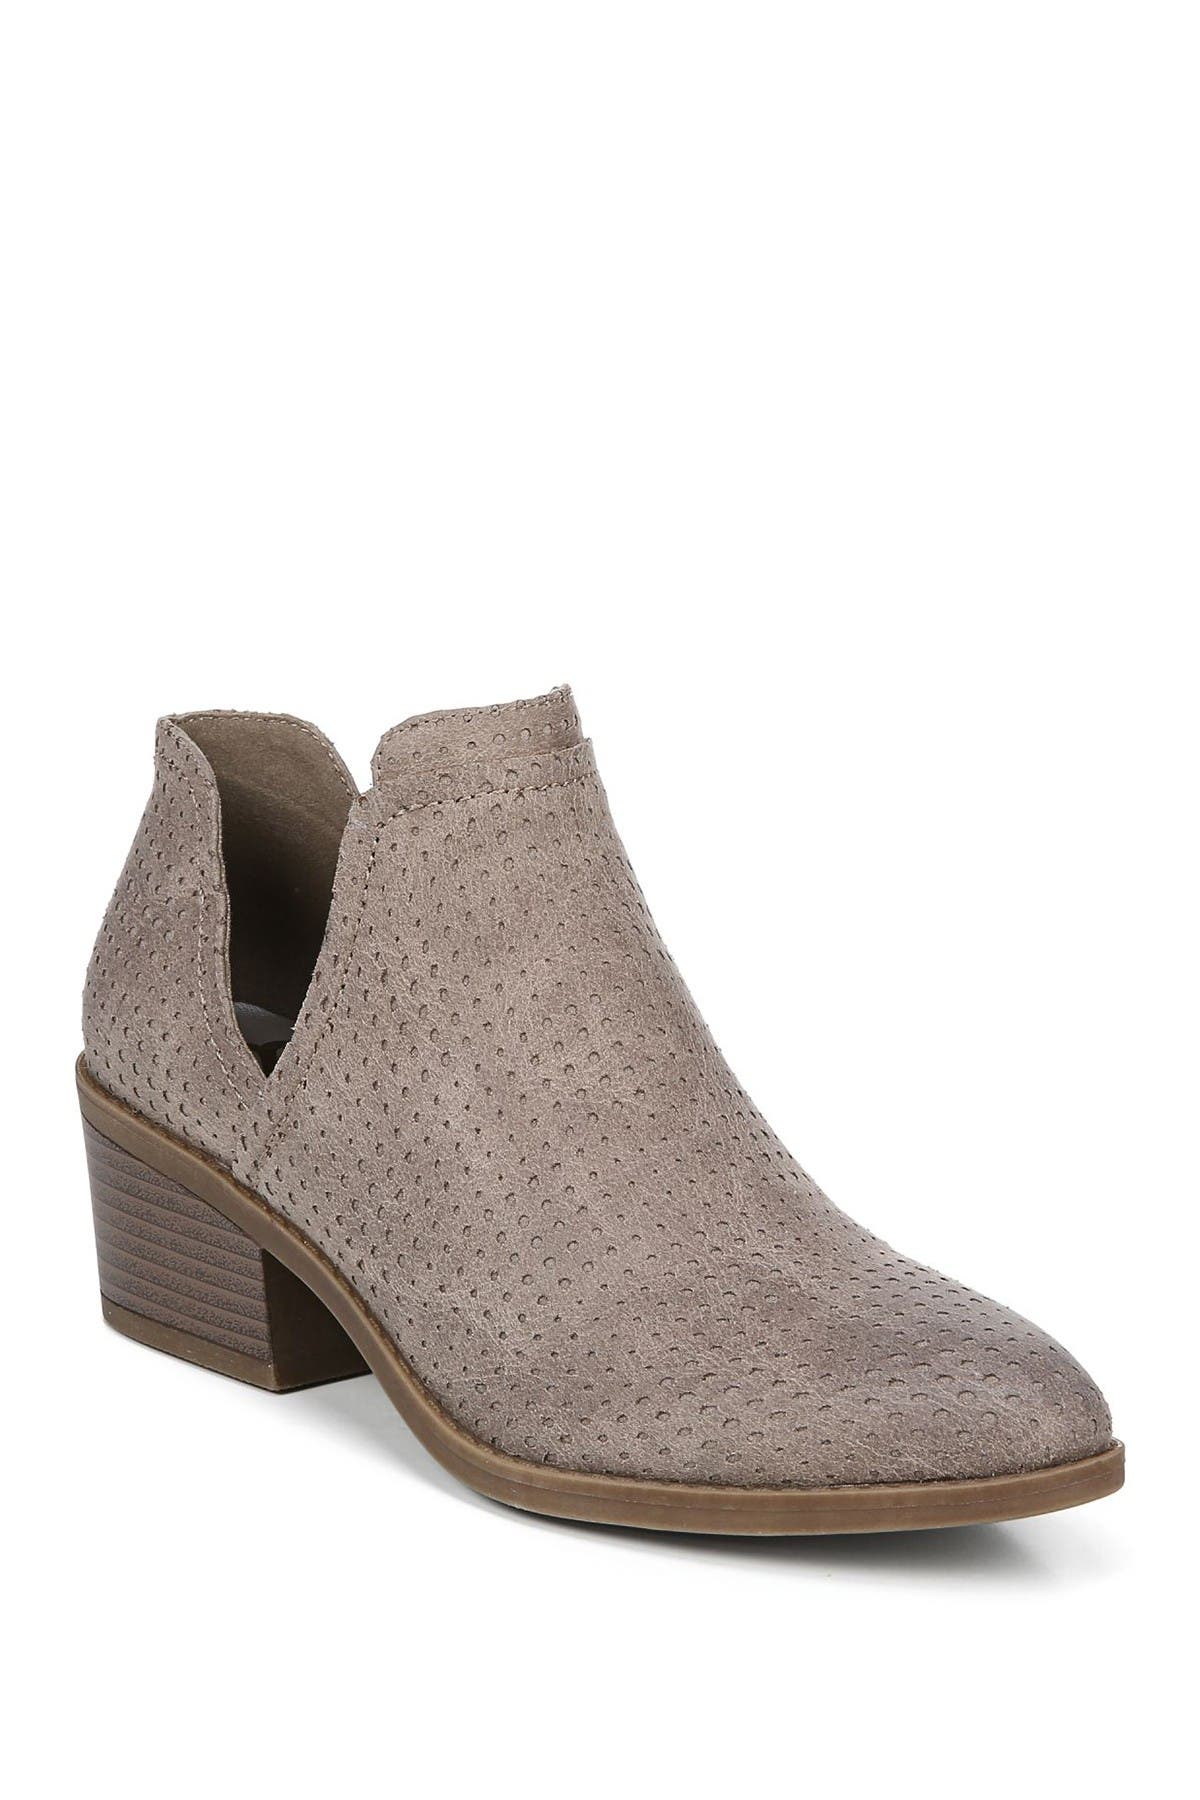 Fergalicious | Wilder Perforated Ankle 